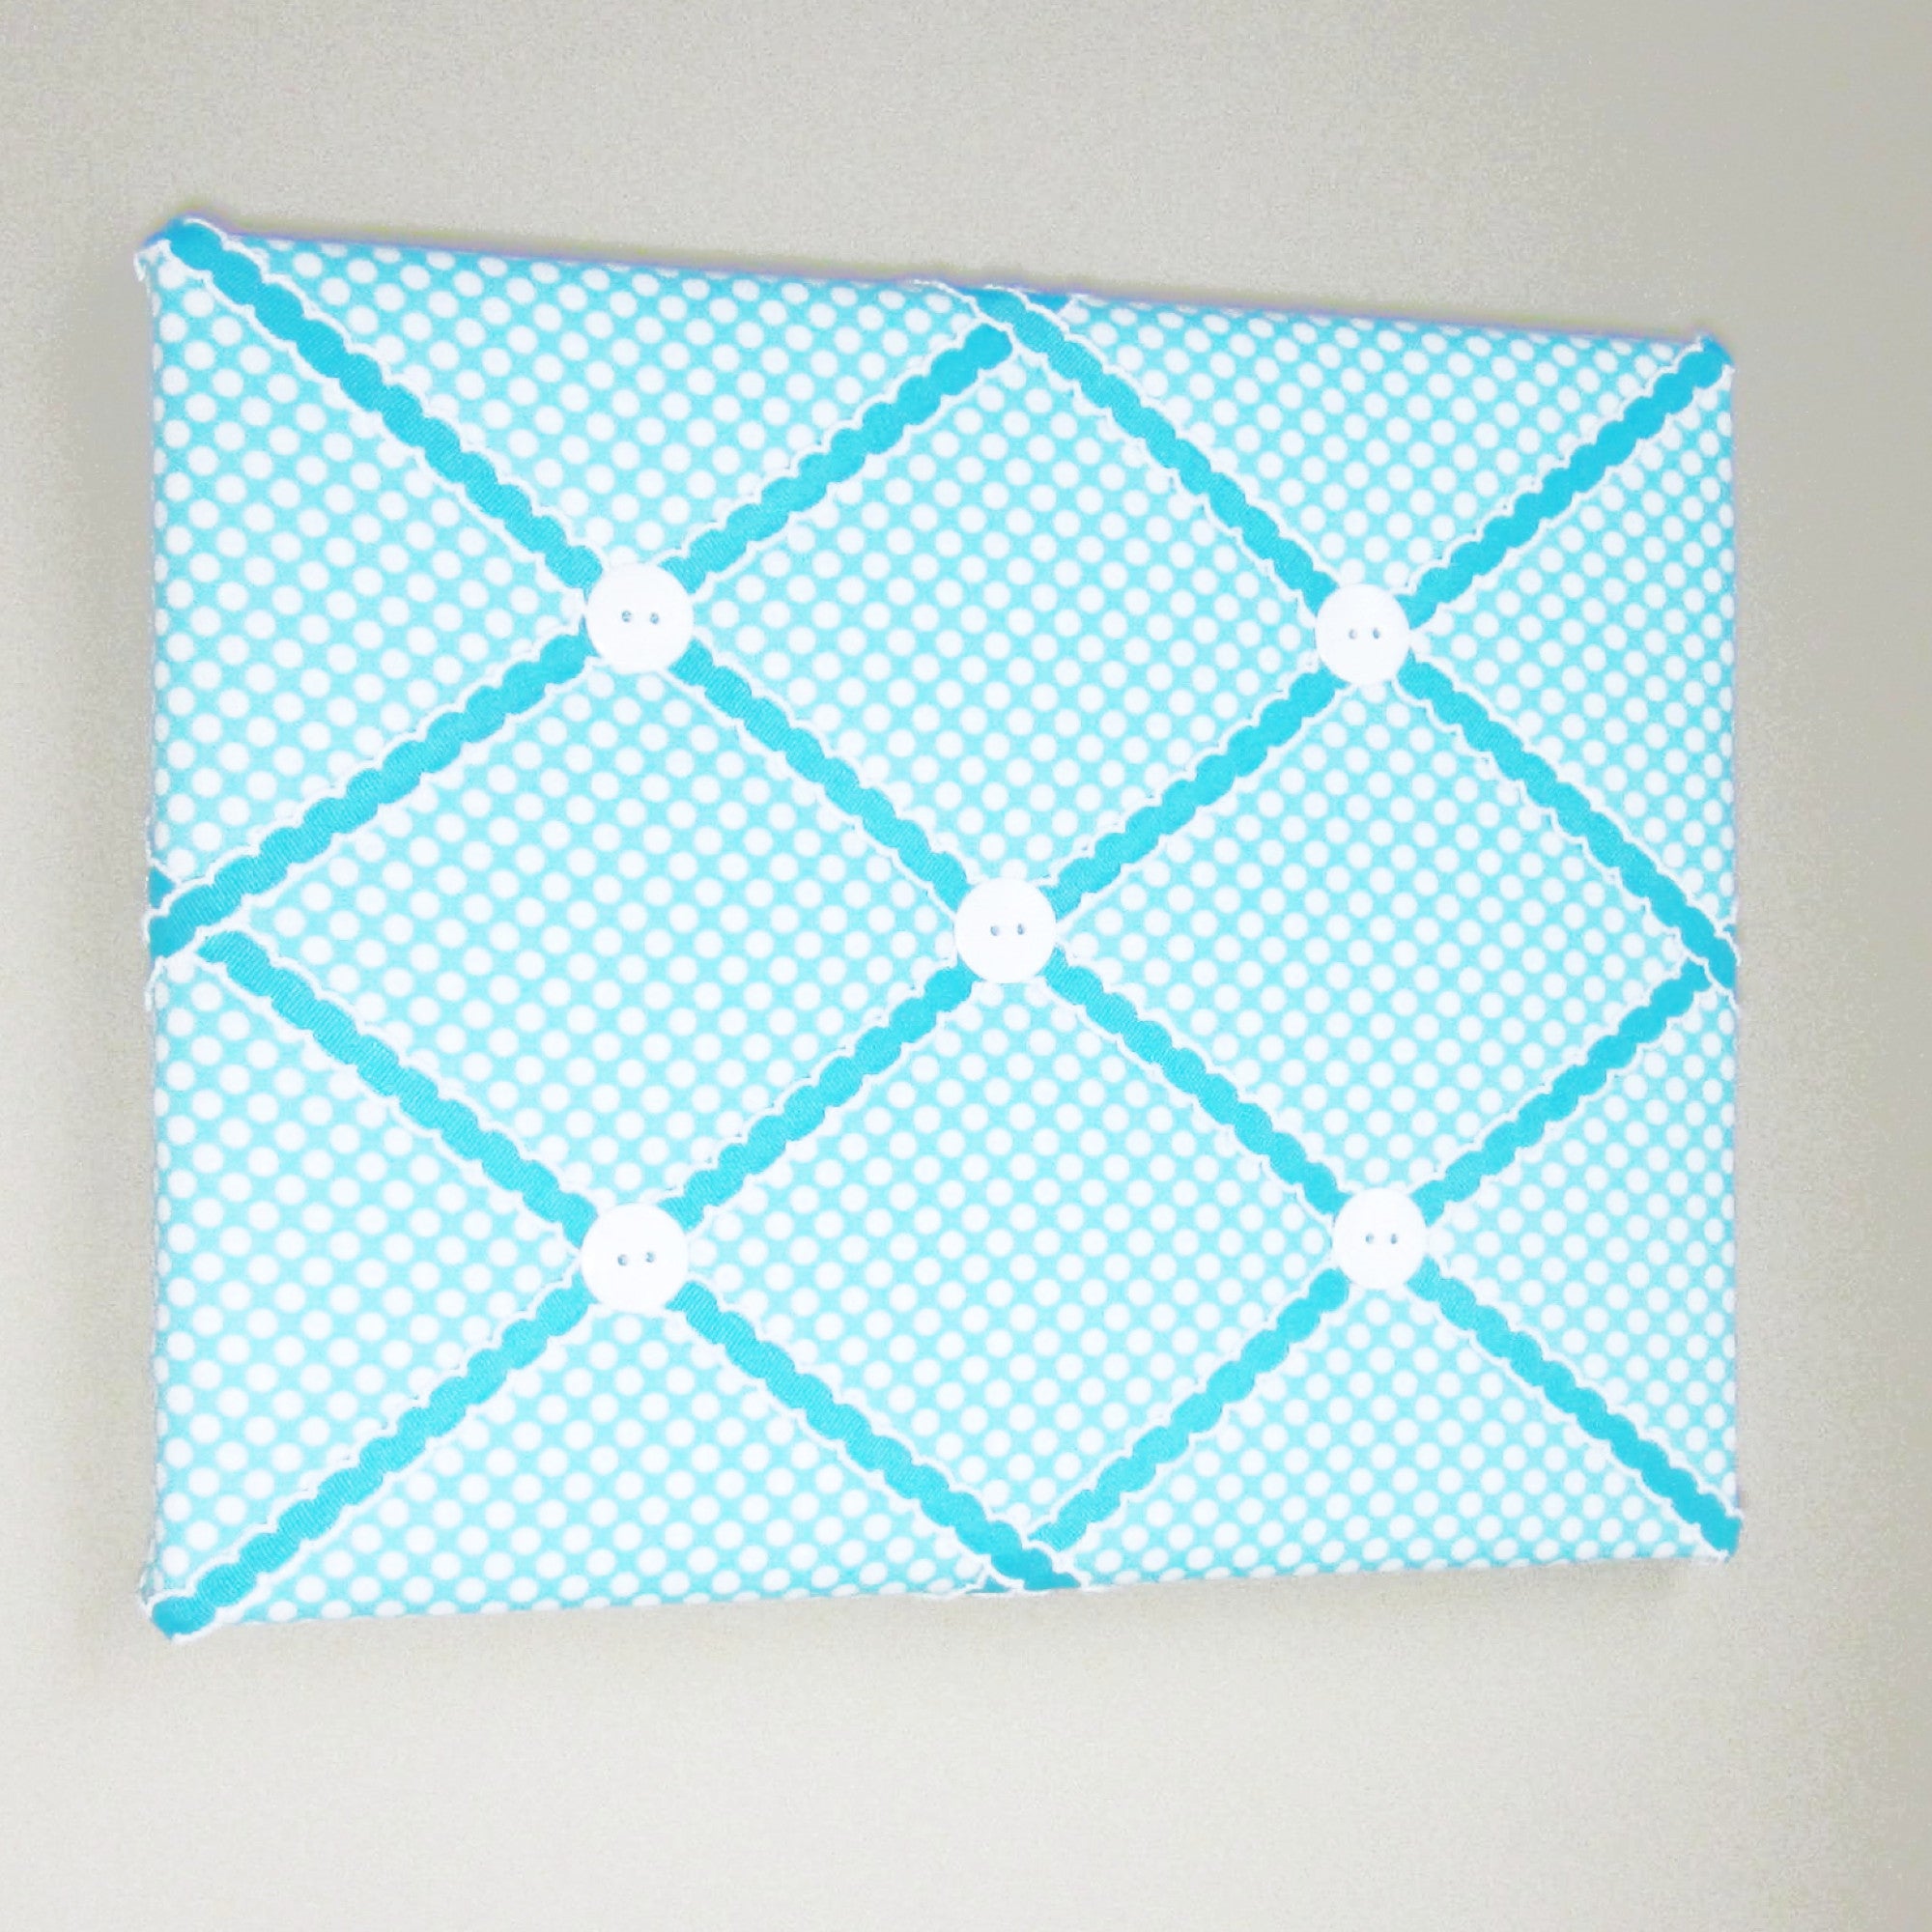 11"x14"  Memory Board or Bow Holder-Turquoise and White Polka Dot